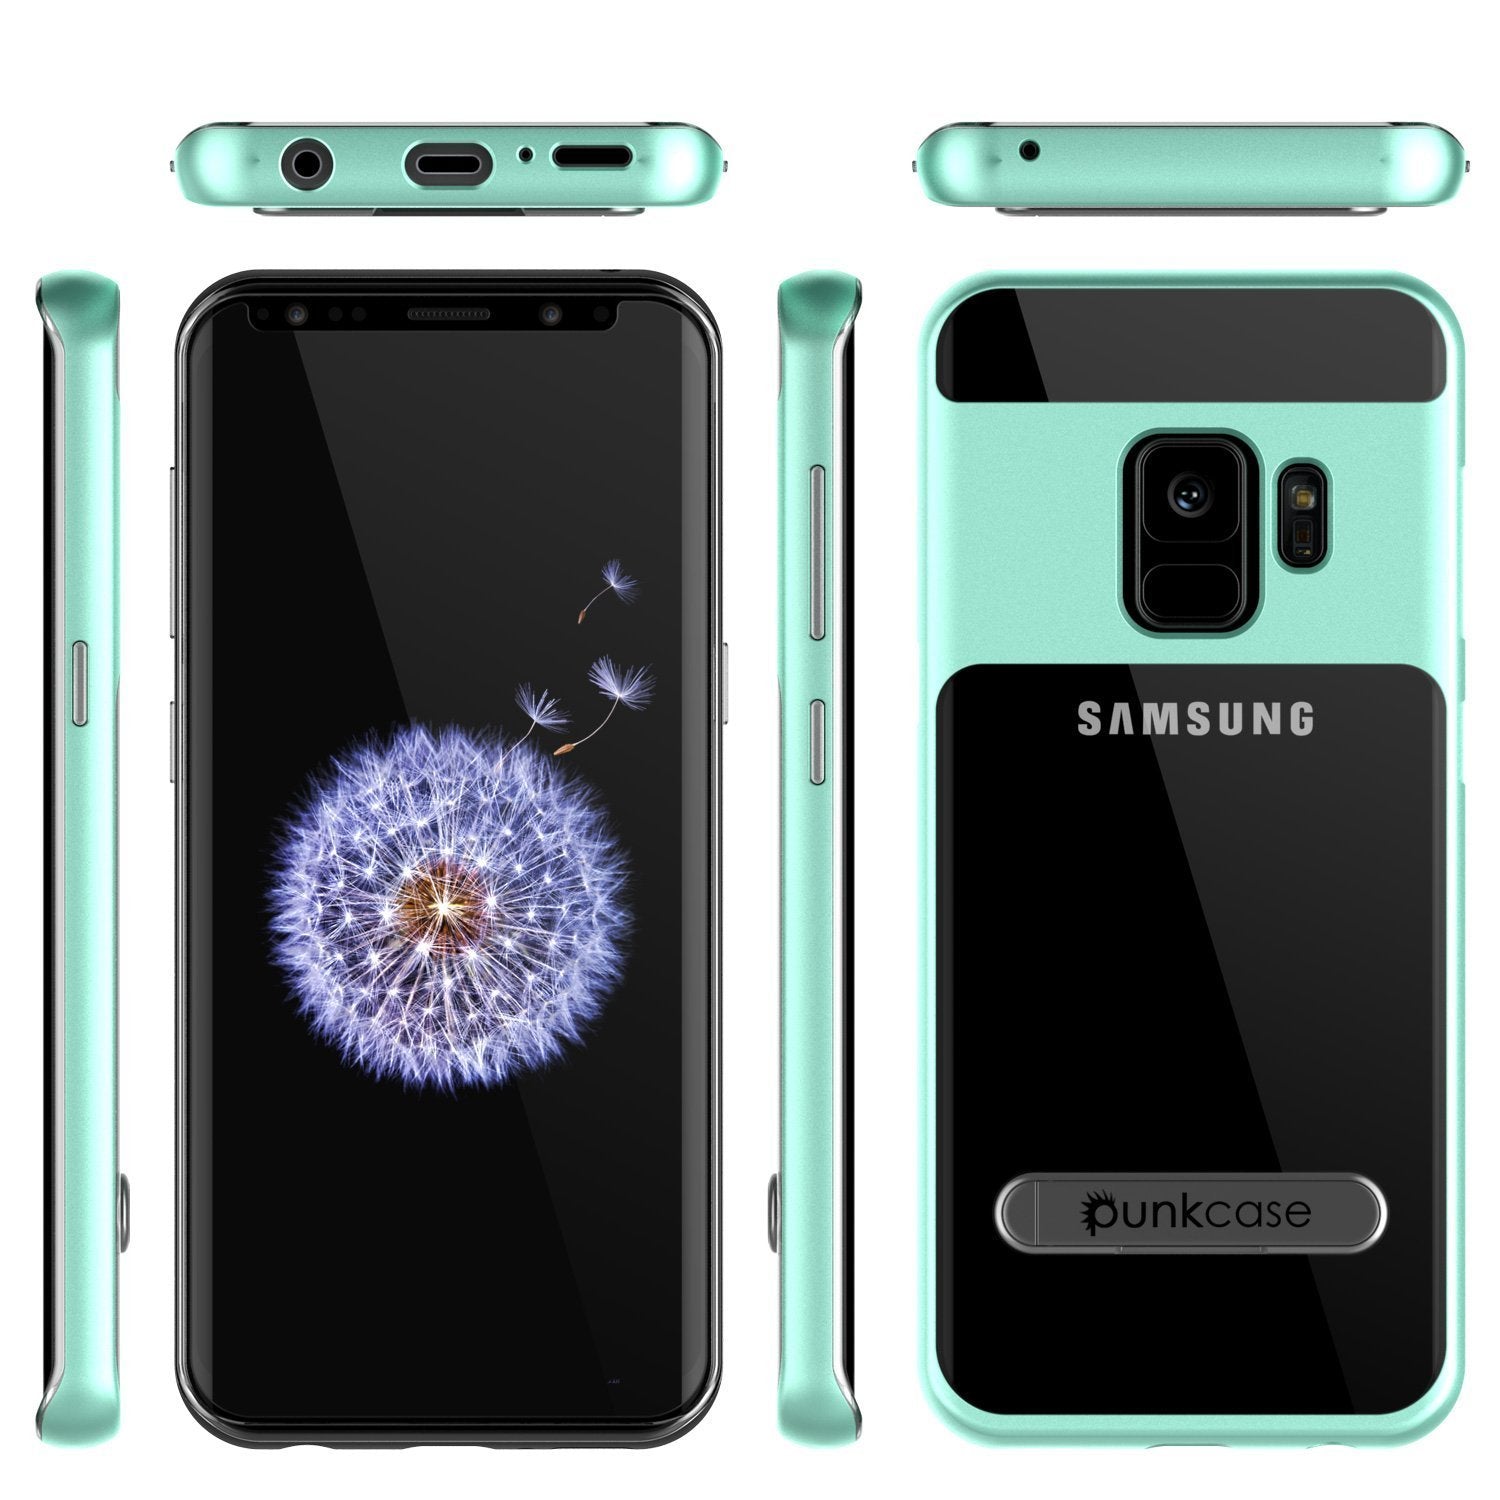 Galaxy S9 Case, PUNKcase [LUCID 3.0 Series] [Slim Fit] [Clear Back] Armor Cover w/ Integrated Kickstand, Anti-Shock System & PUNKSHIELD Screen Protector for Samsung Galaxy S9 [Teal] - PunkCase NZ